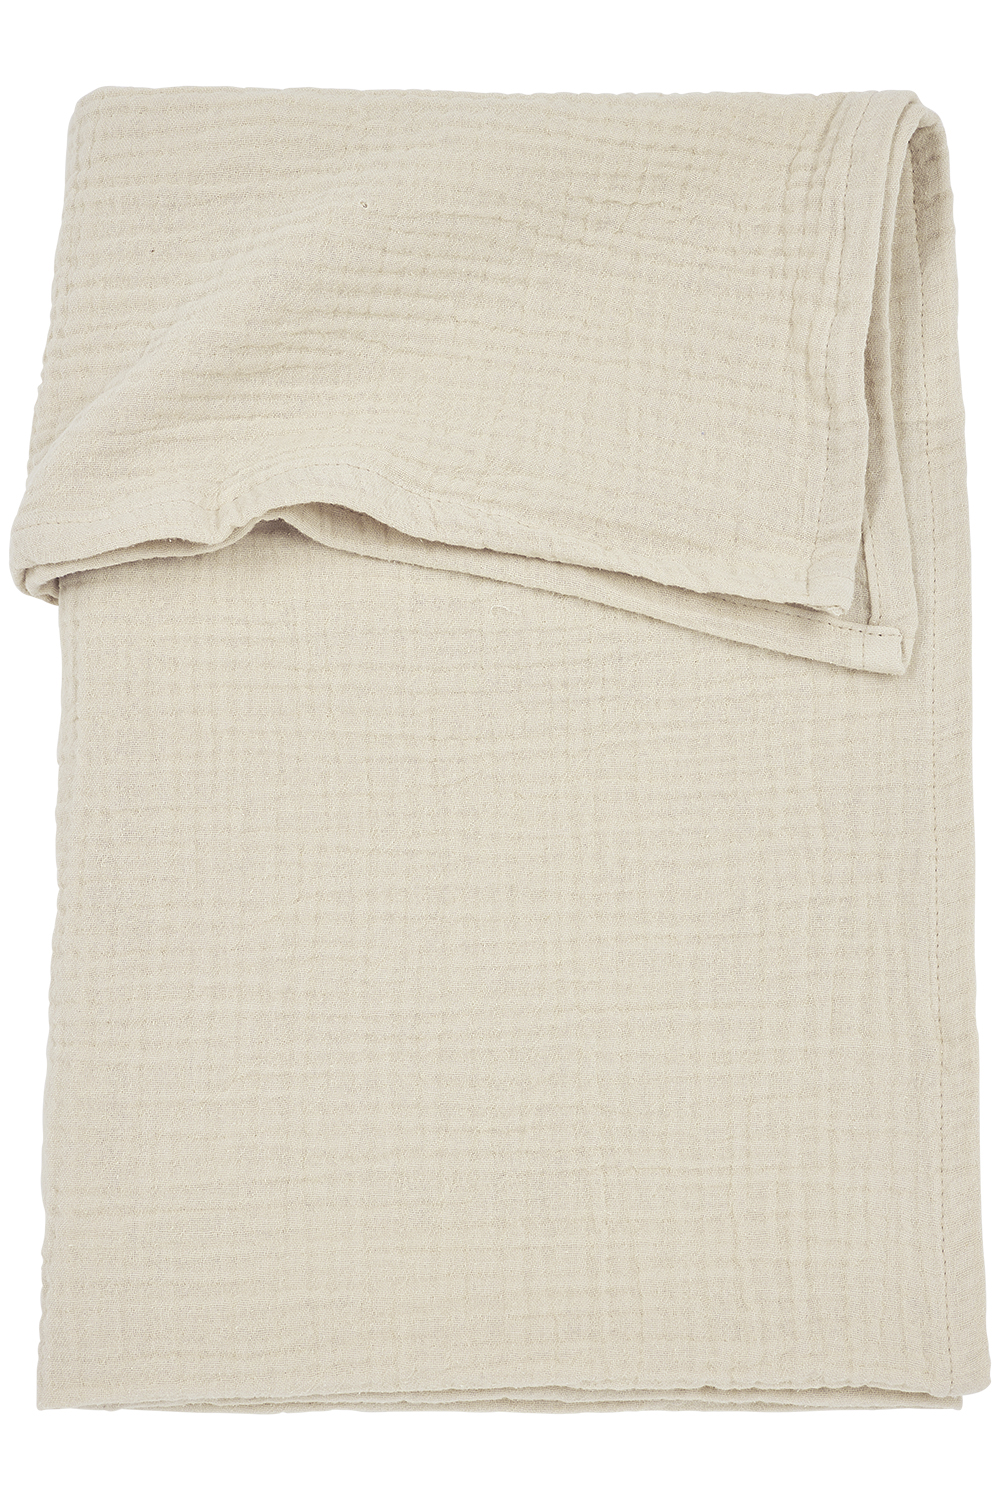 Cot bed sheet pre-washed muslin Uni - soft sand - 100x150cm